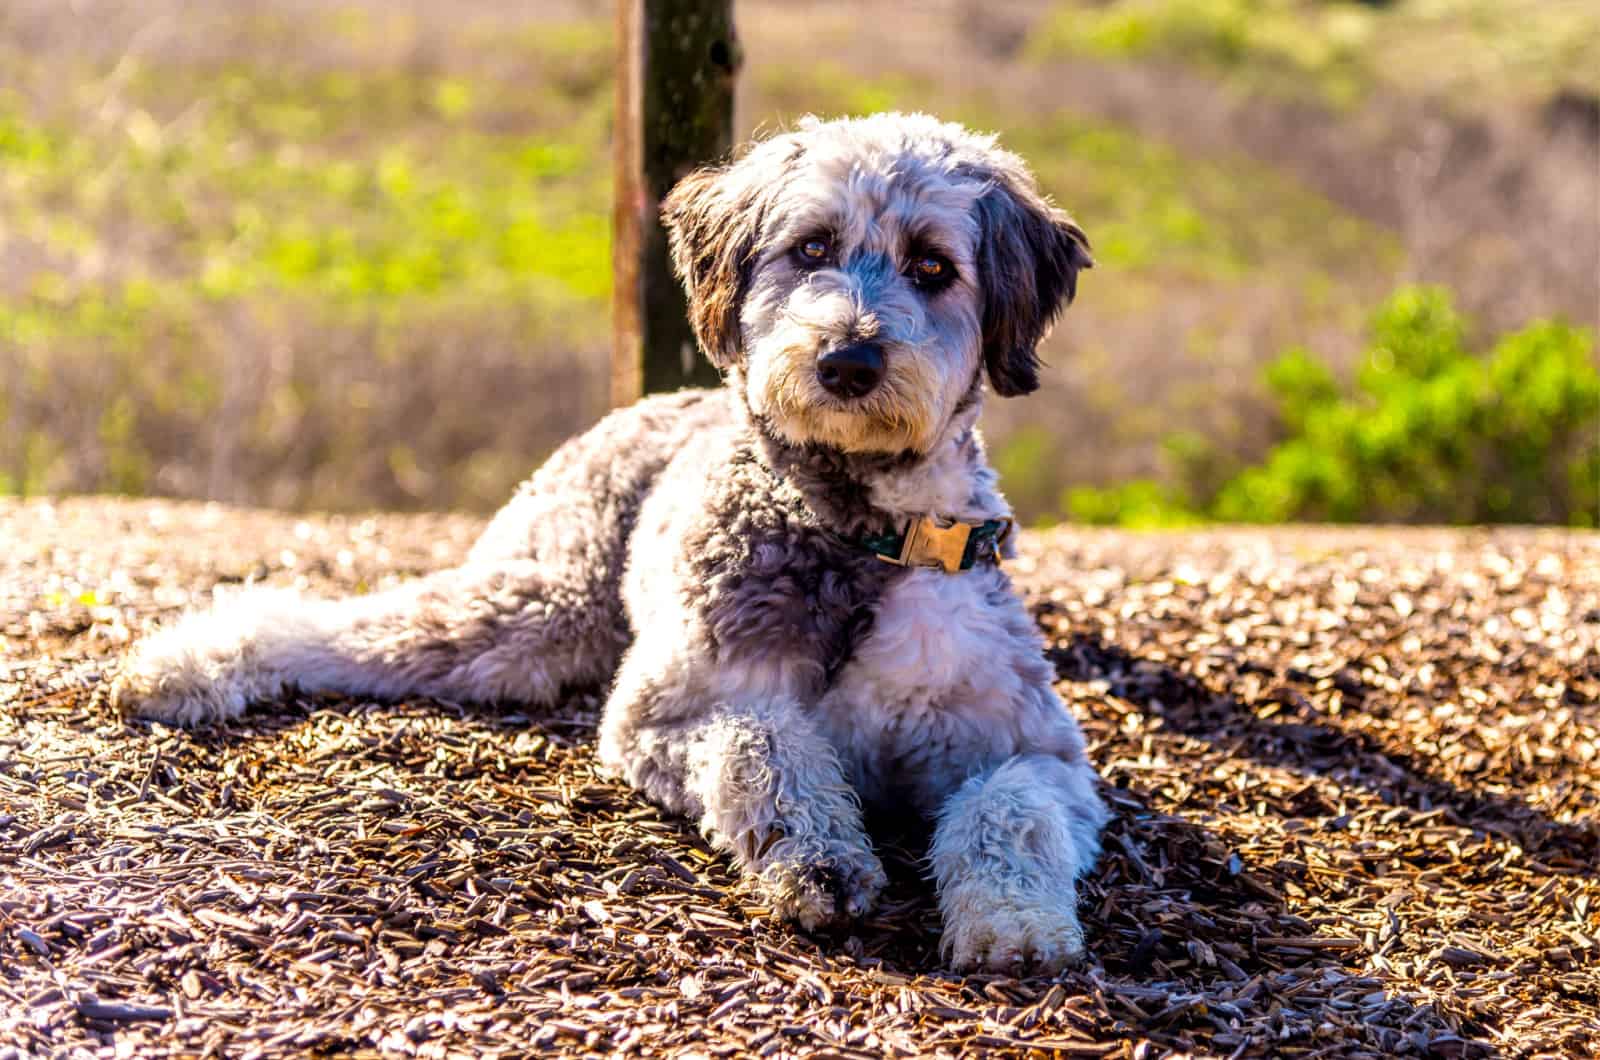 F1b Aussiedoodle Vs F1 Aussiedoodle: What’s The Difference?